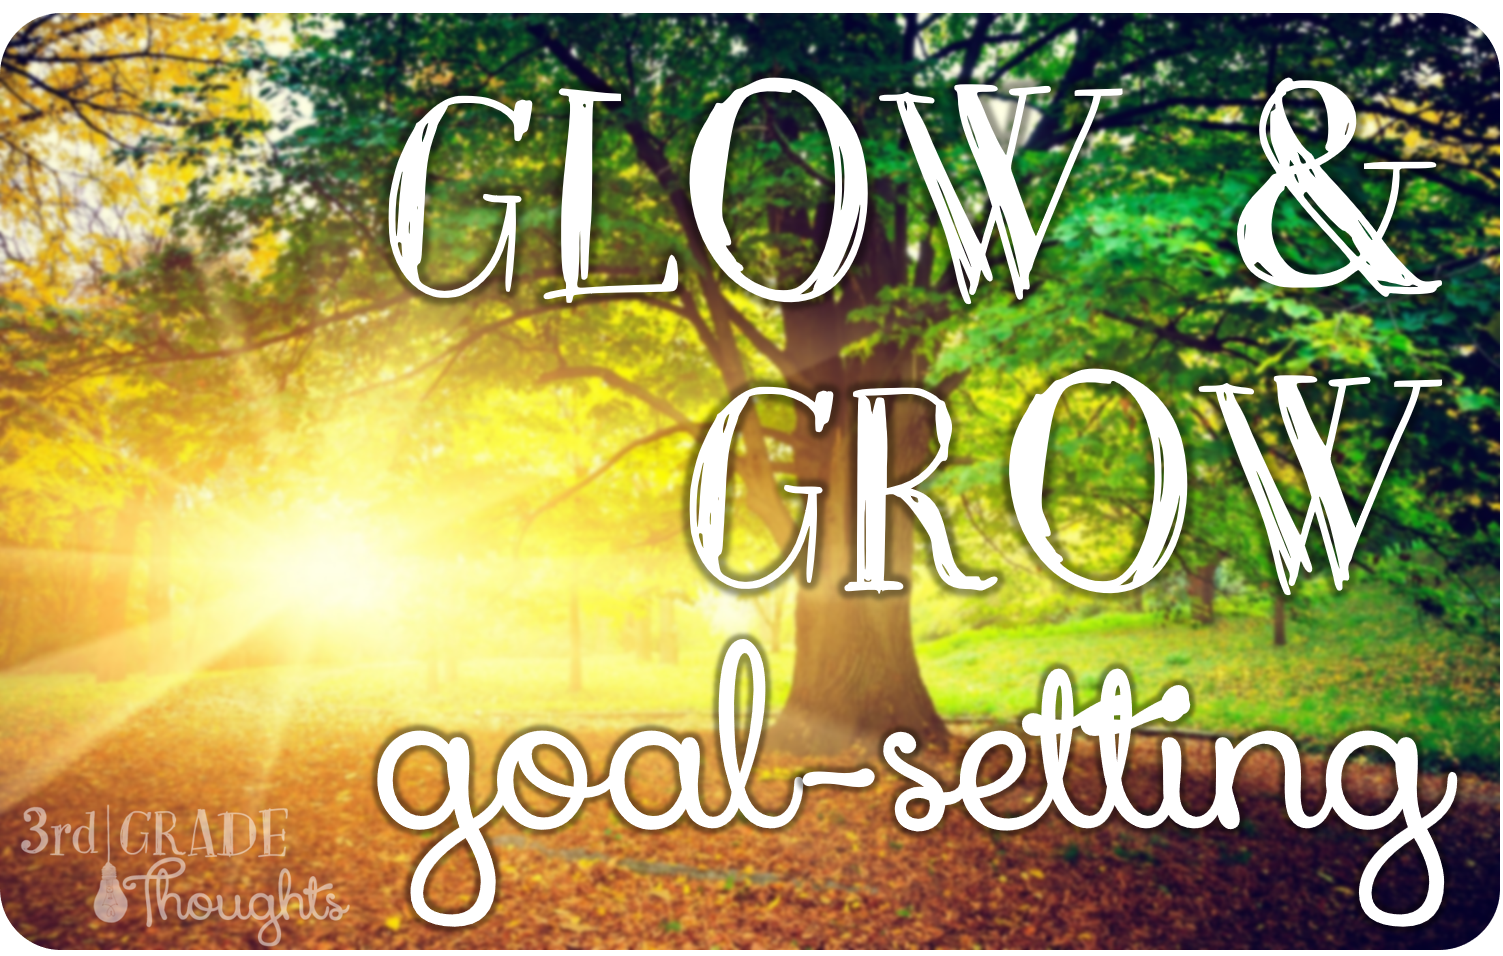 glow-and-grow-goal-setting-3rd-grade-thoughts